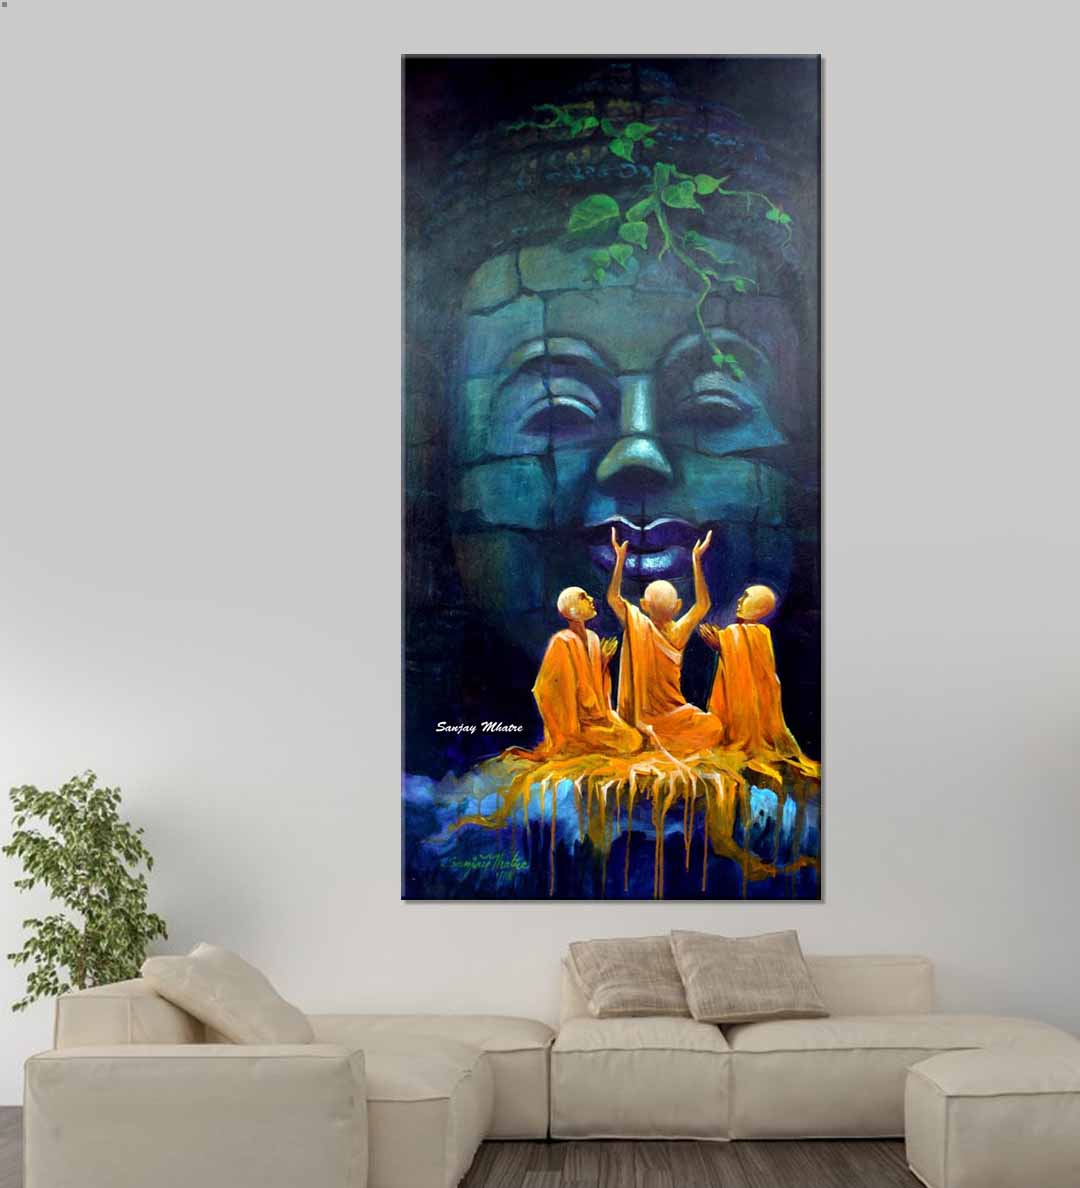 The Monks - Wall Decor - 1